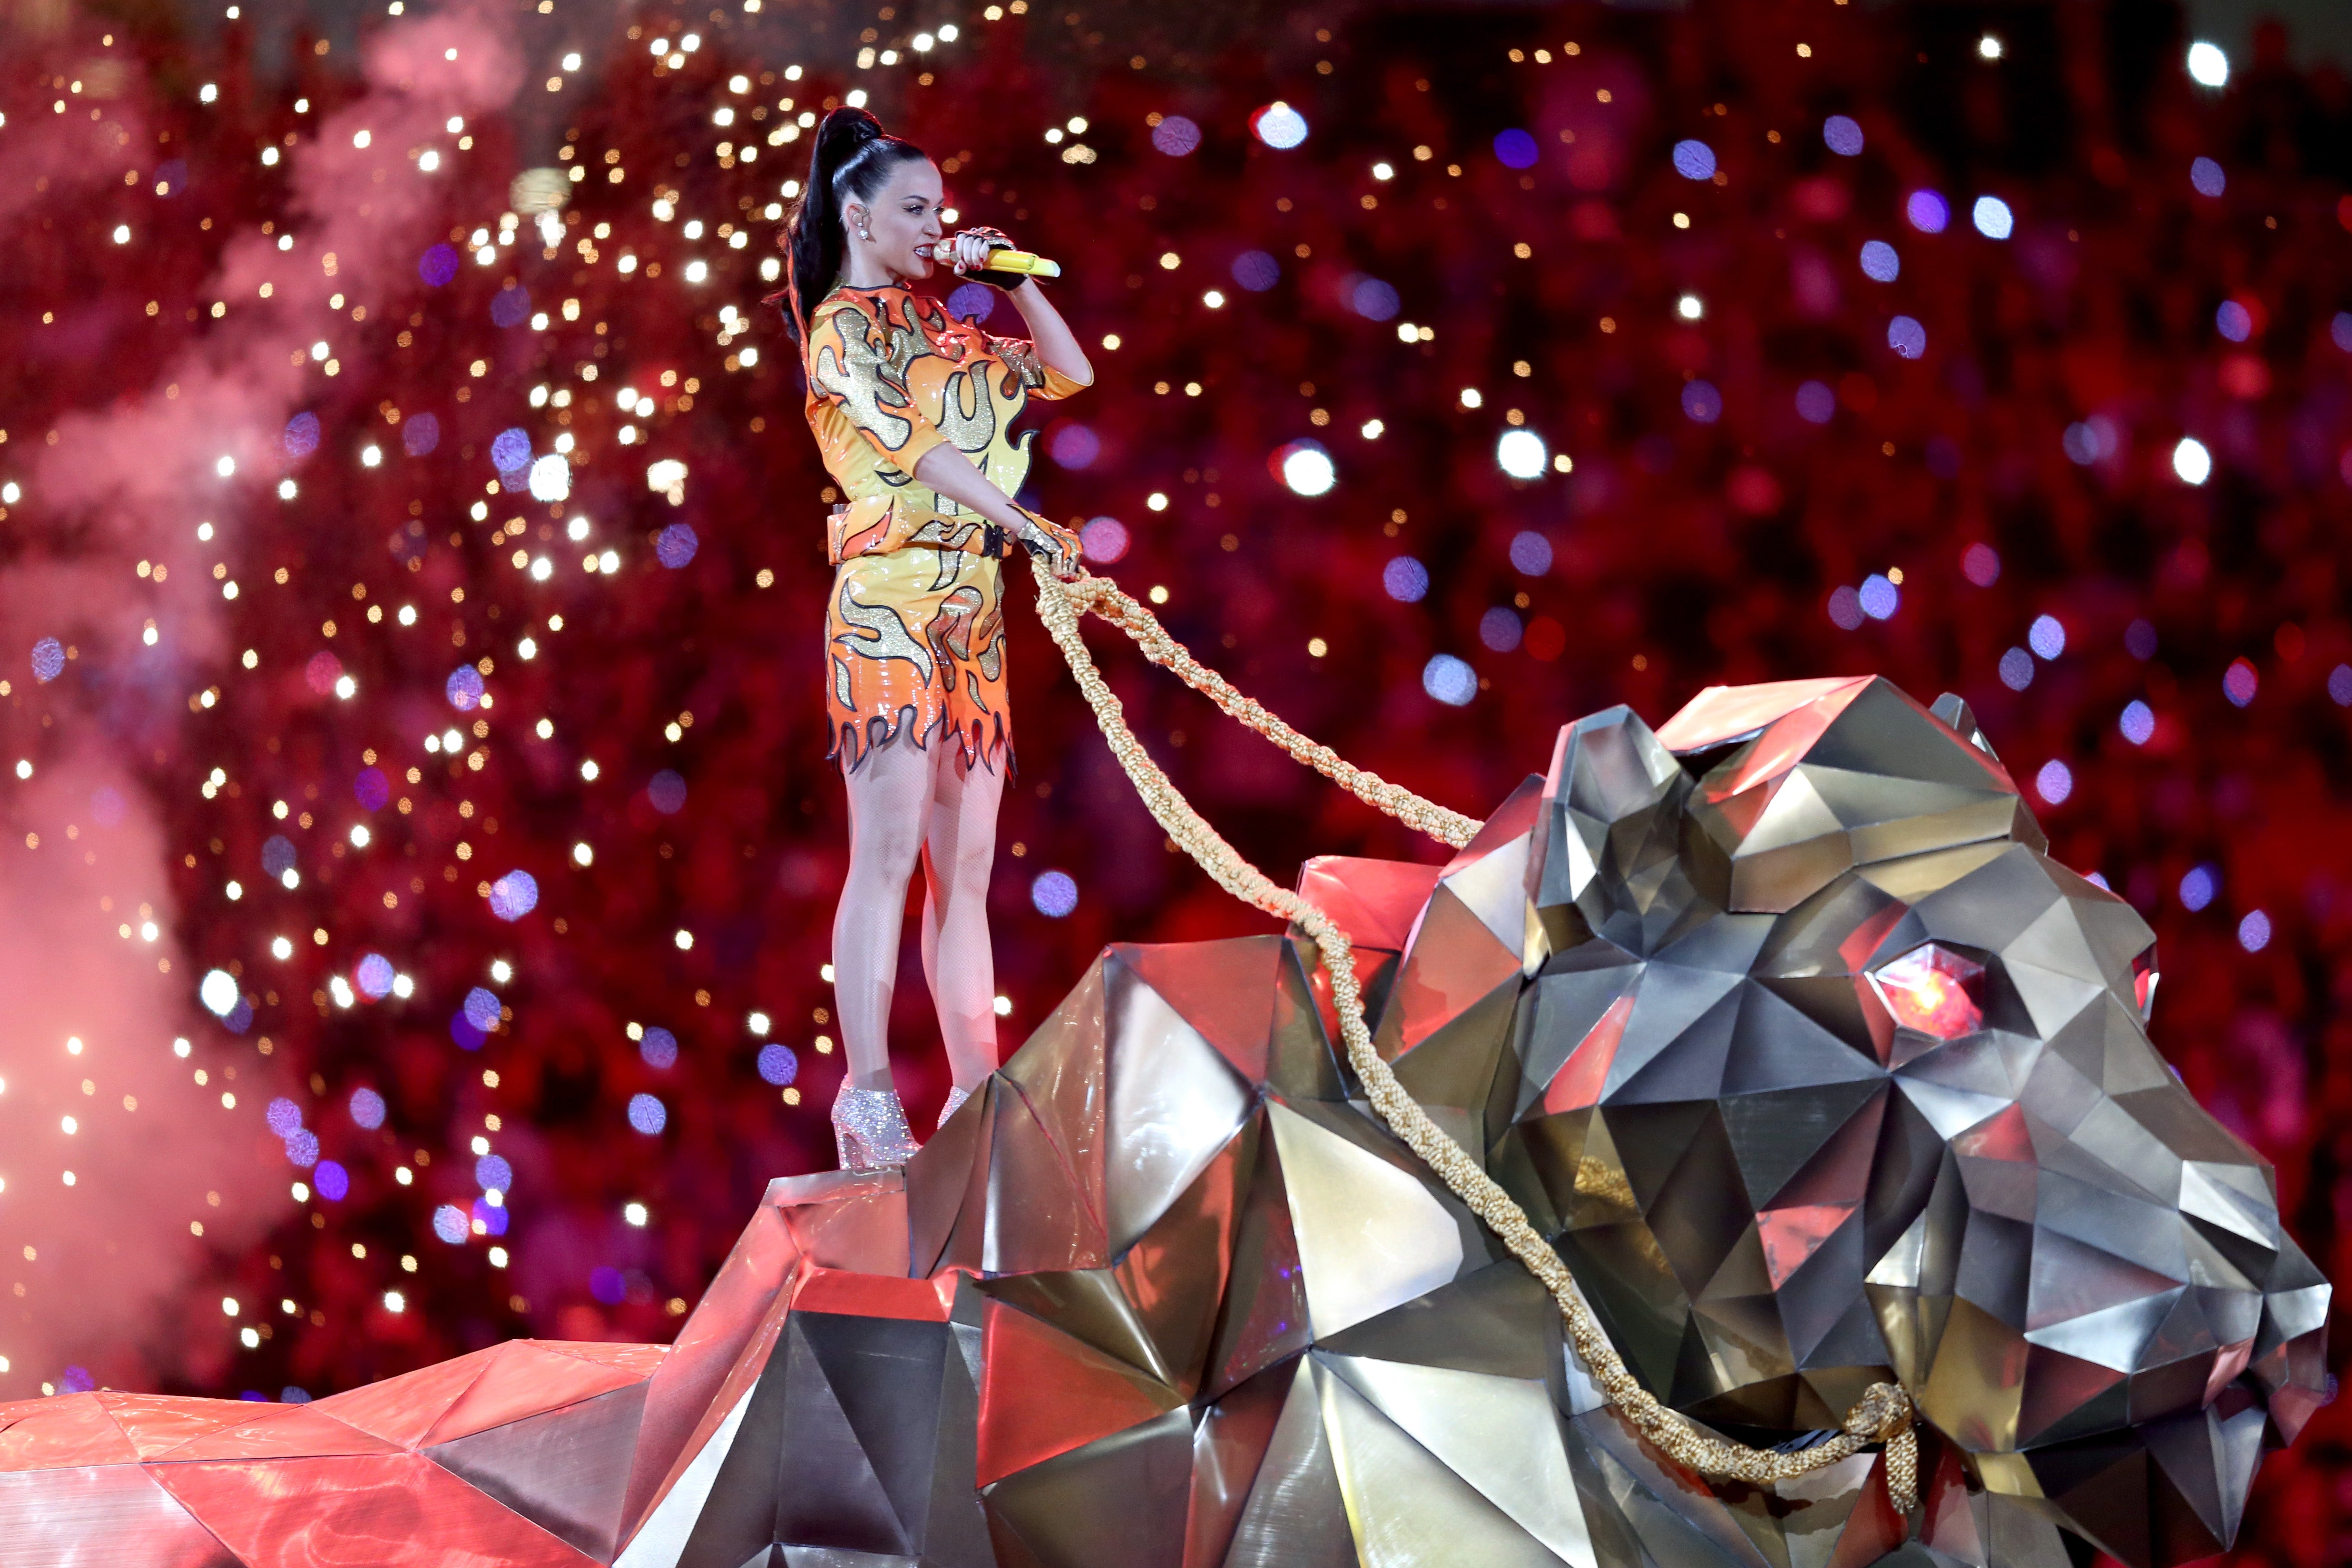 Katy Perry entered on an animatronic mechanical lion at the 2015 halftime show